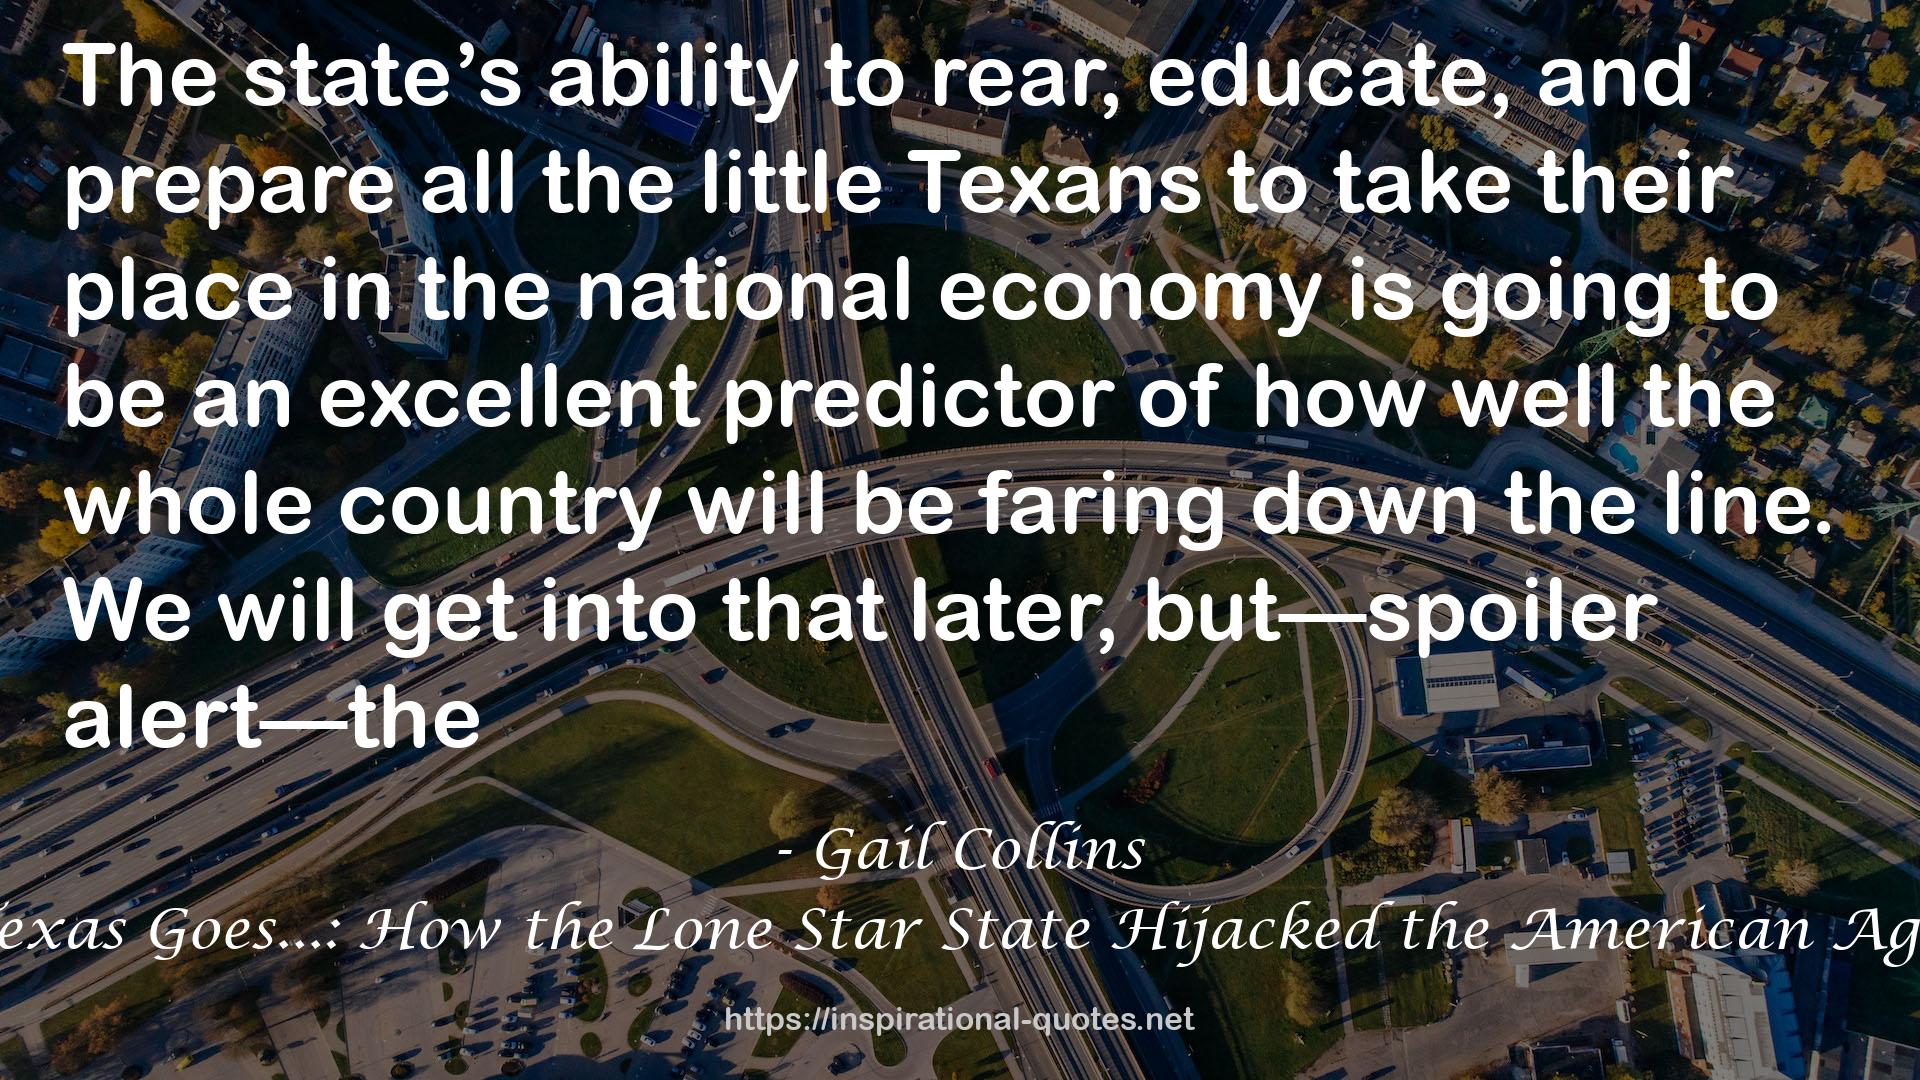 As Texas Goes...: How the Lone Star State Hijacked the American Agenda QUOTES